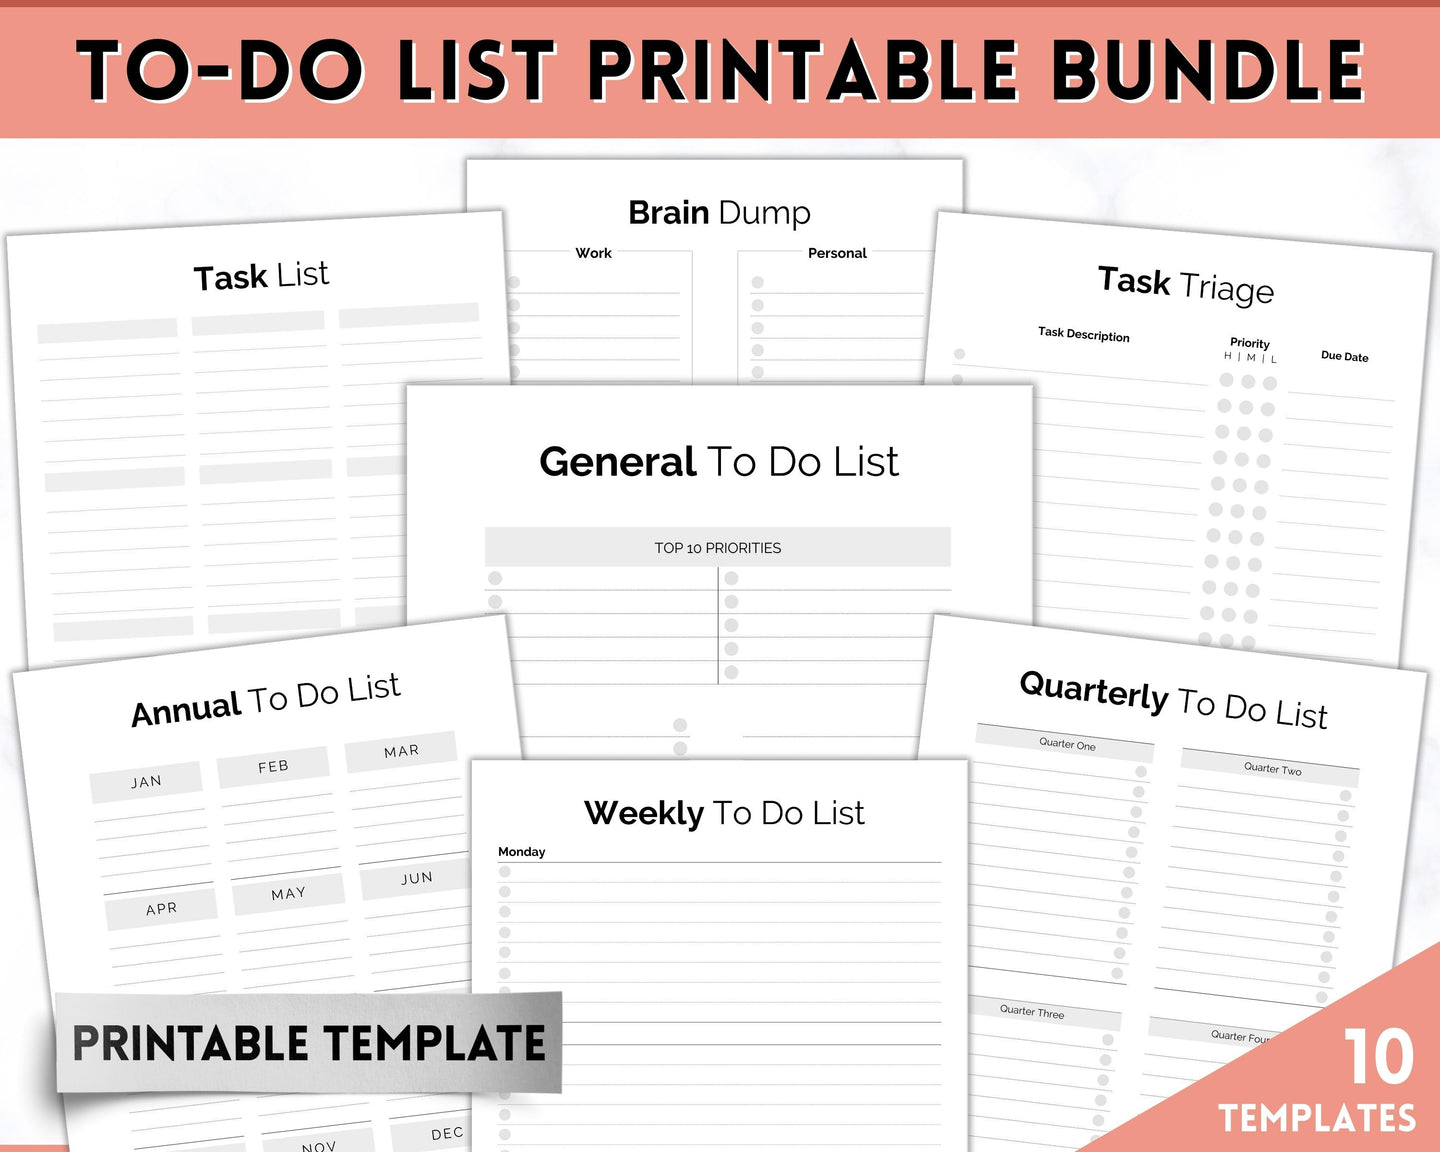 To Do List Printable Bundle - 10 Page Daily, Weekly & Annual Productivity Planner | Digital ADHD Brain Dump Template | Mono